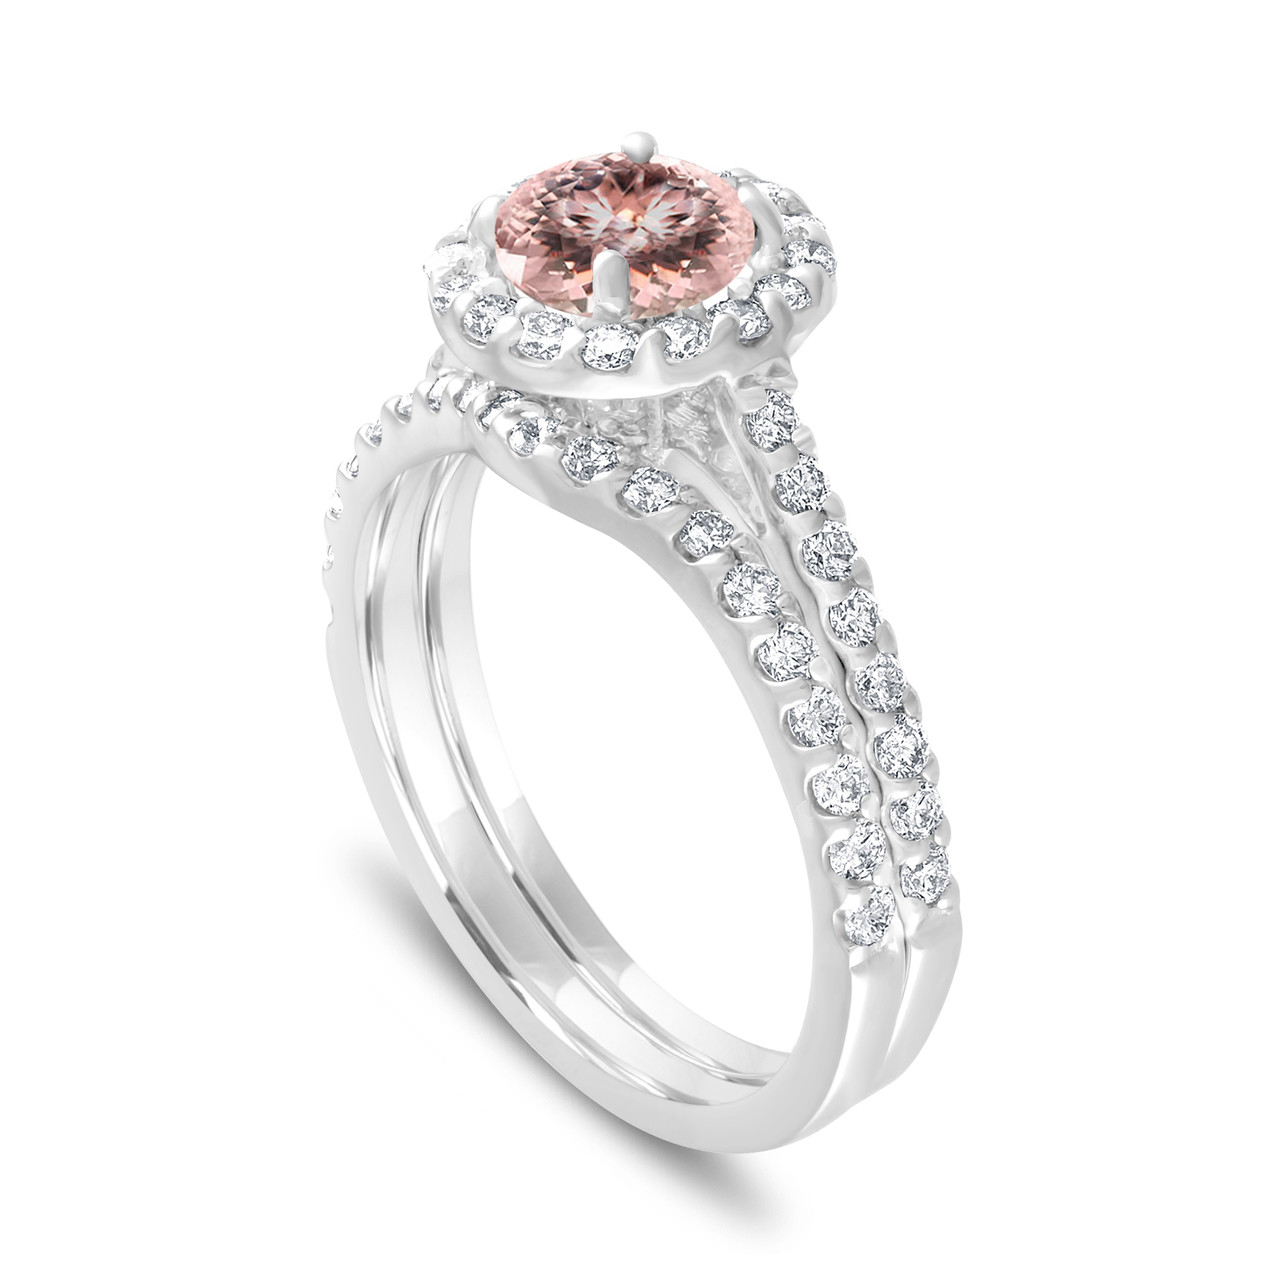 Oval Cut Peach Morganite Engagement Ring Promise Gift - MollyJewelryUS